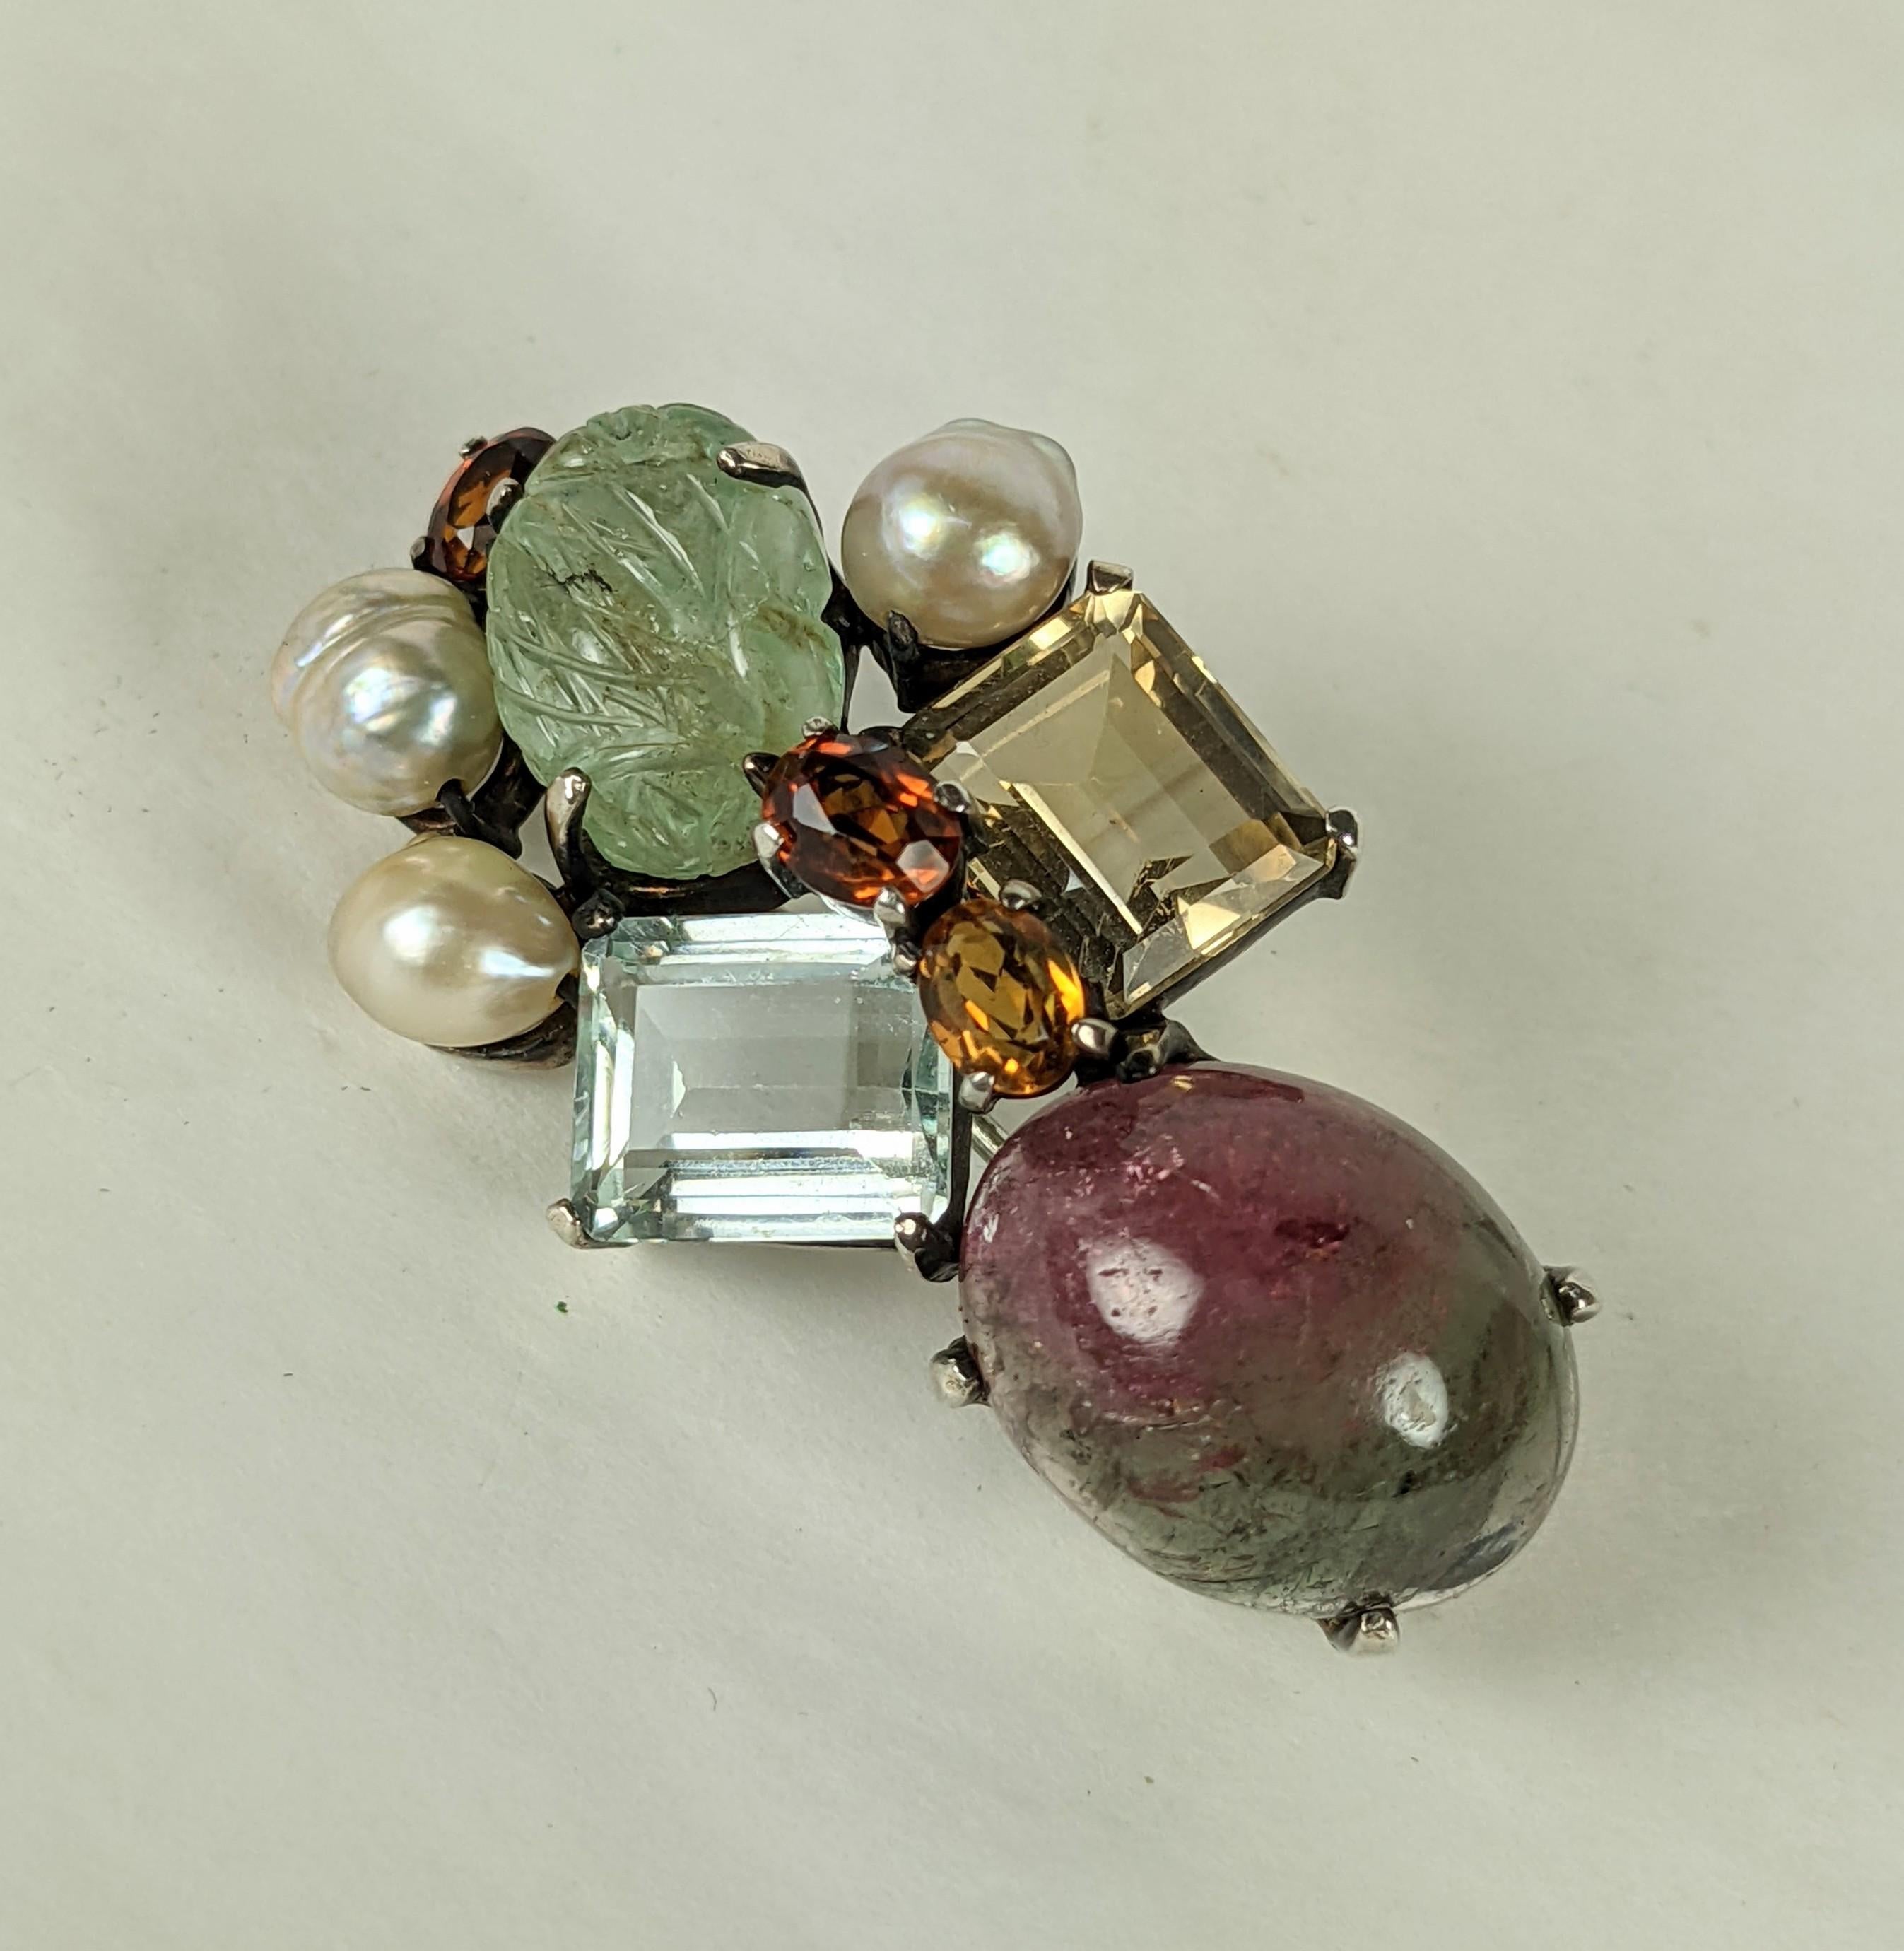 Attractive artisanal Gem Set Brooch from the 1950's set in sterling silver. An unusual combination of watermelon tourmaline, aquamarine, fluorite and citrines with natural pearls. Great play of colors, made from antique elements. 
1950's USA. 2